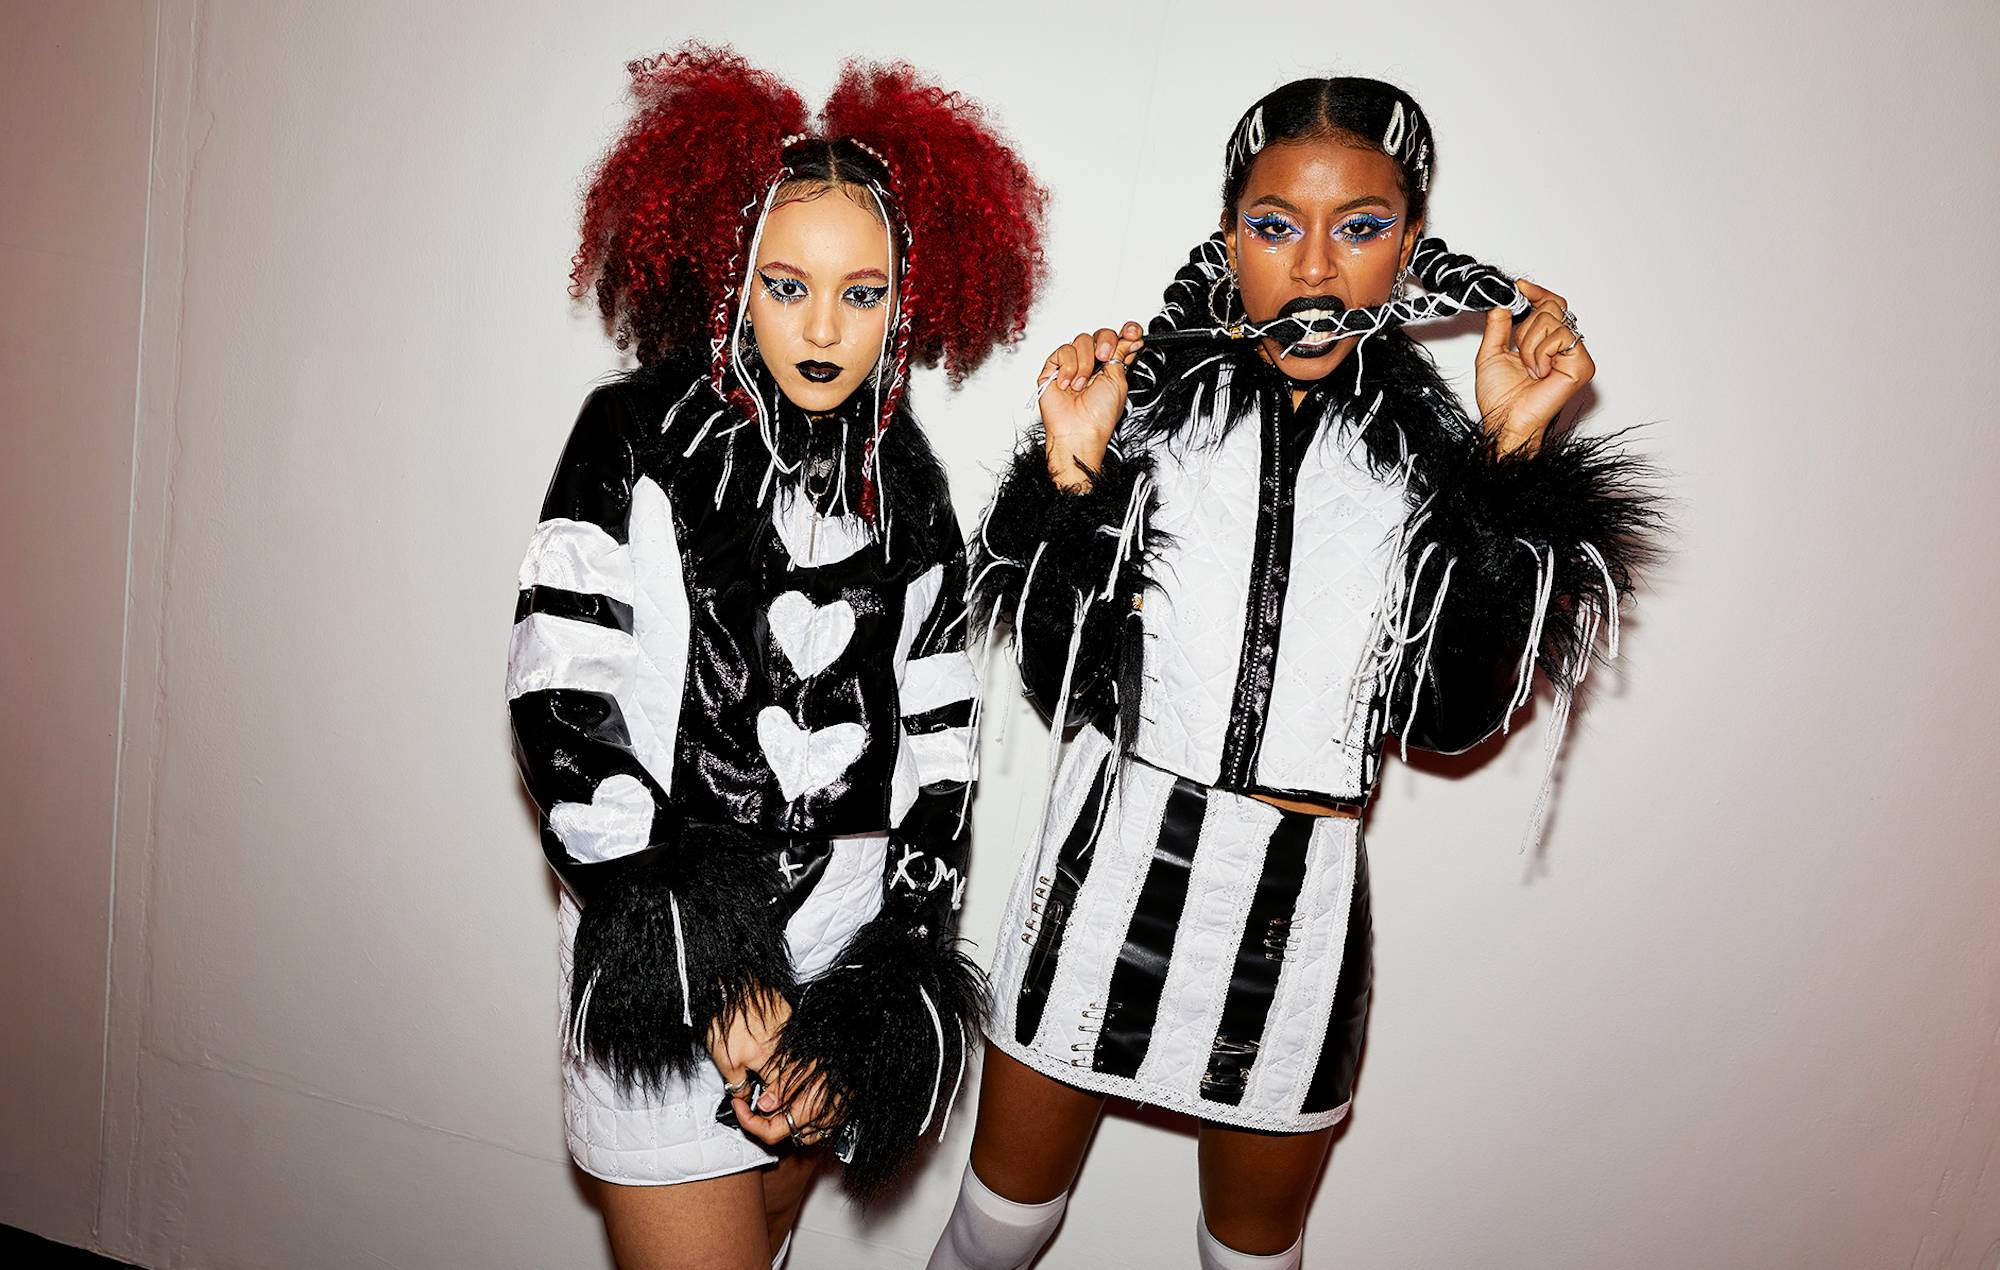 Nova Twins say new album ‘Supernova’ is “a journey of lockdown and coming out the other end a winner”